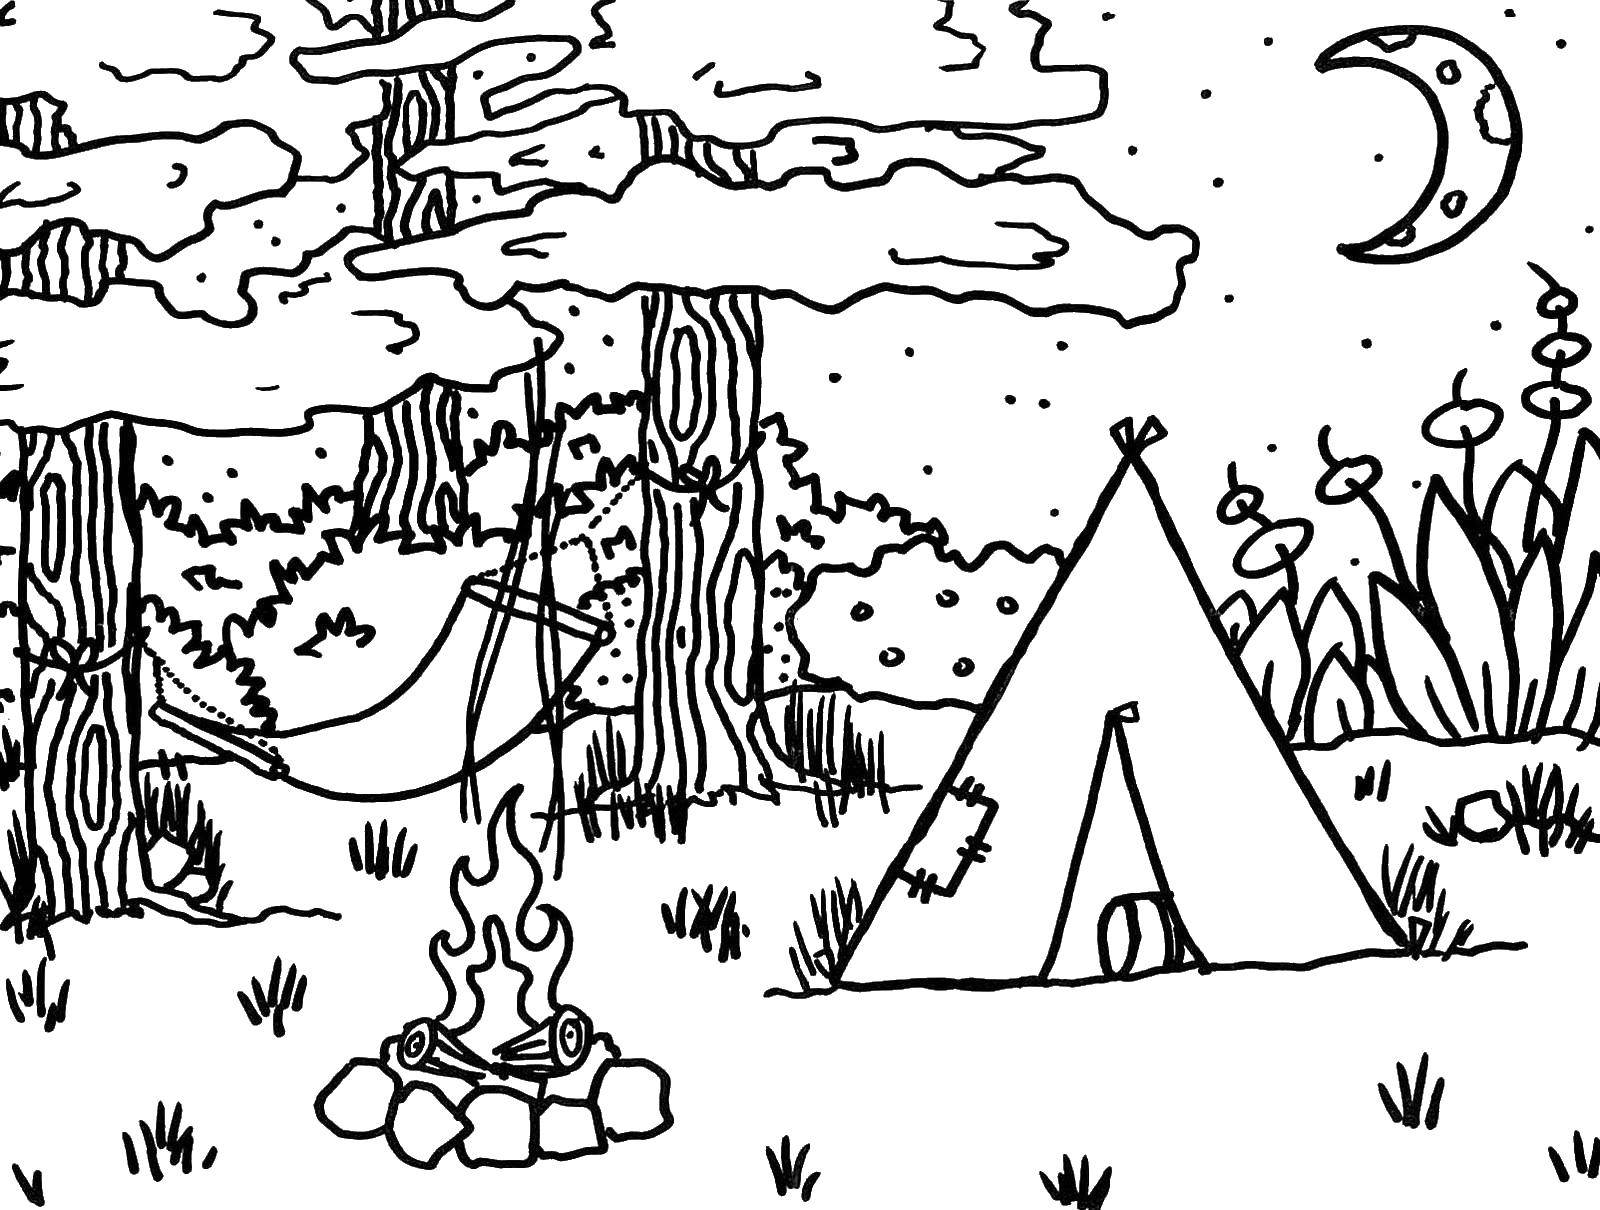 Coloring Night halt. Category Camping. Tags:  leisure, nature, tent camping.